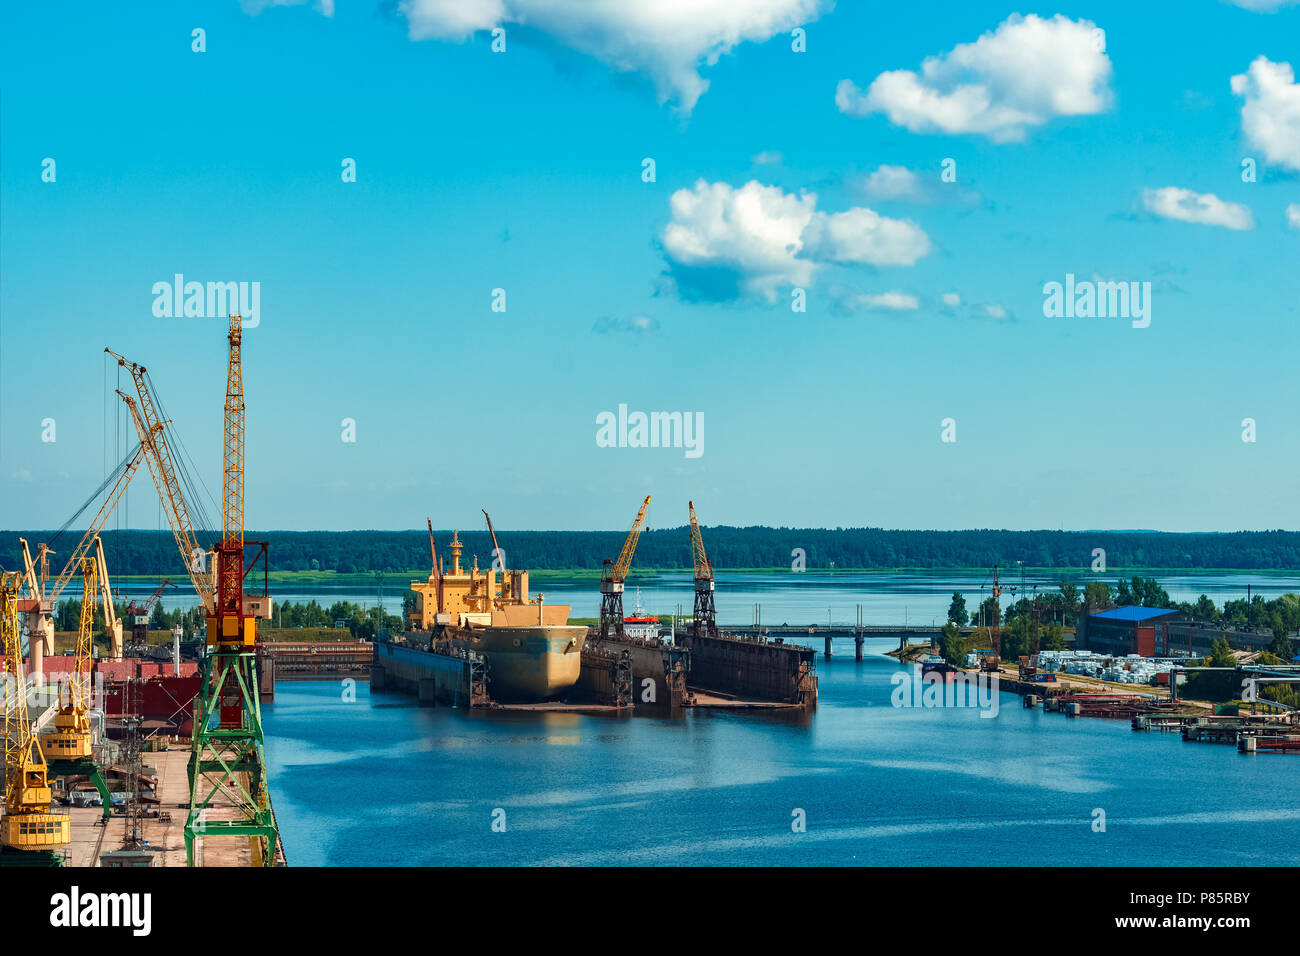 Yellow bulk carrier standing at the old shipyard in the dock Stock Photo